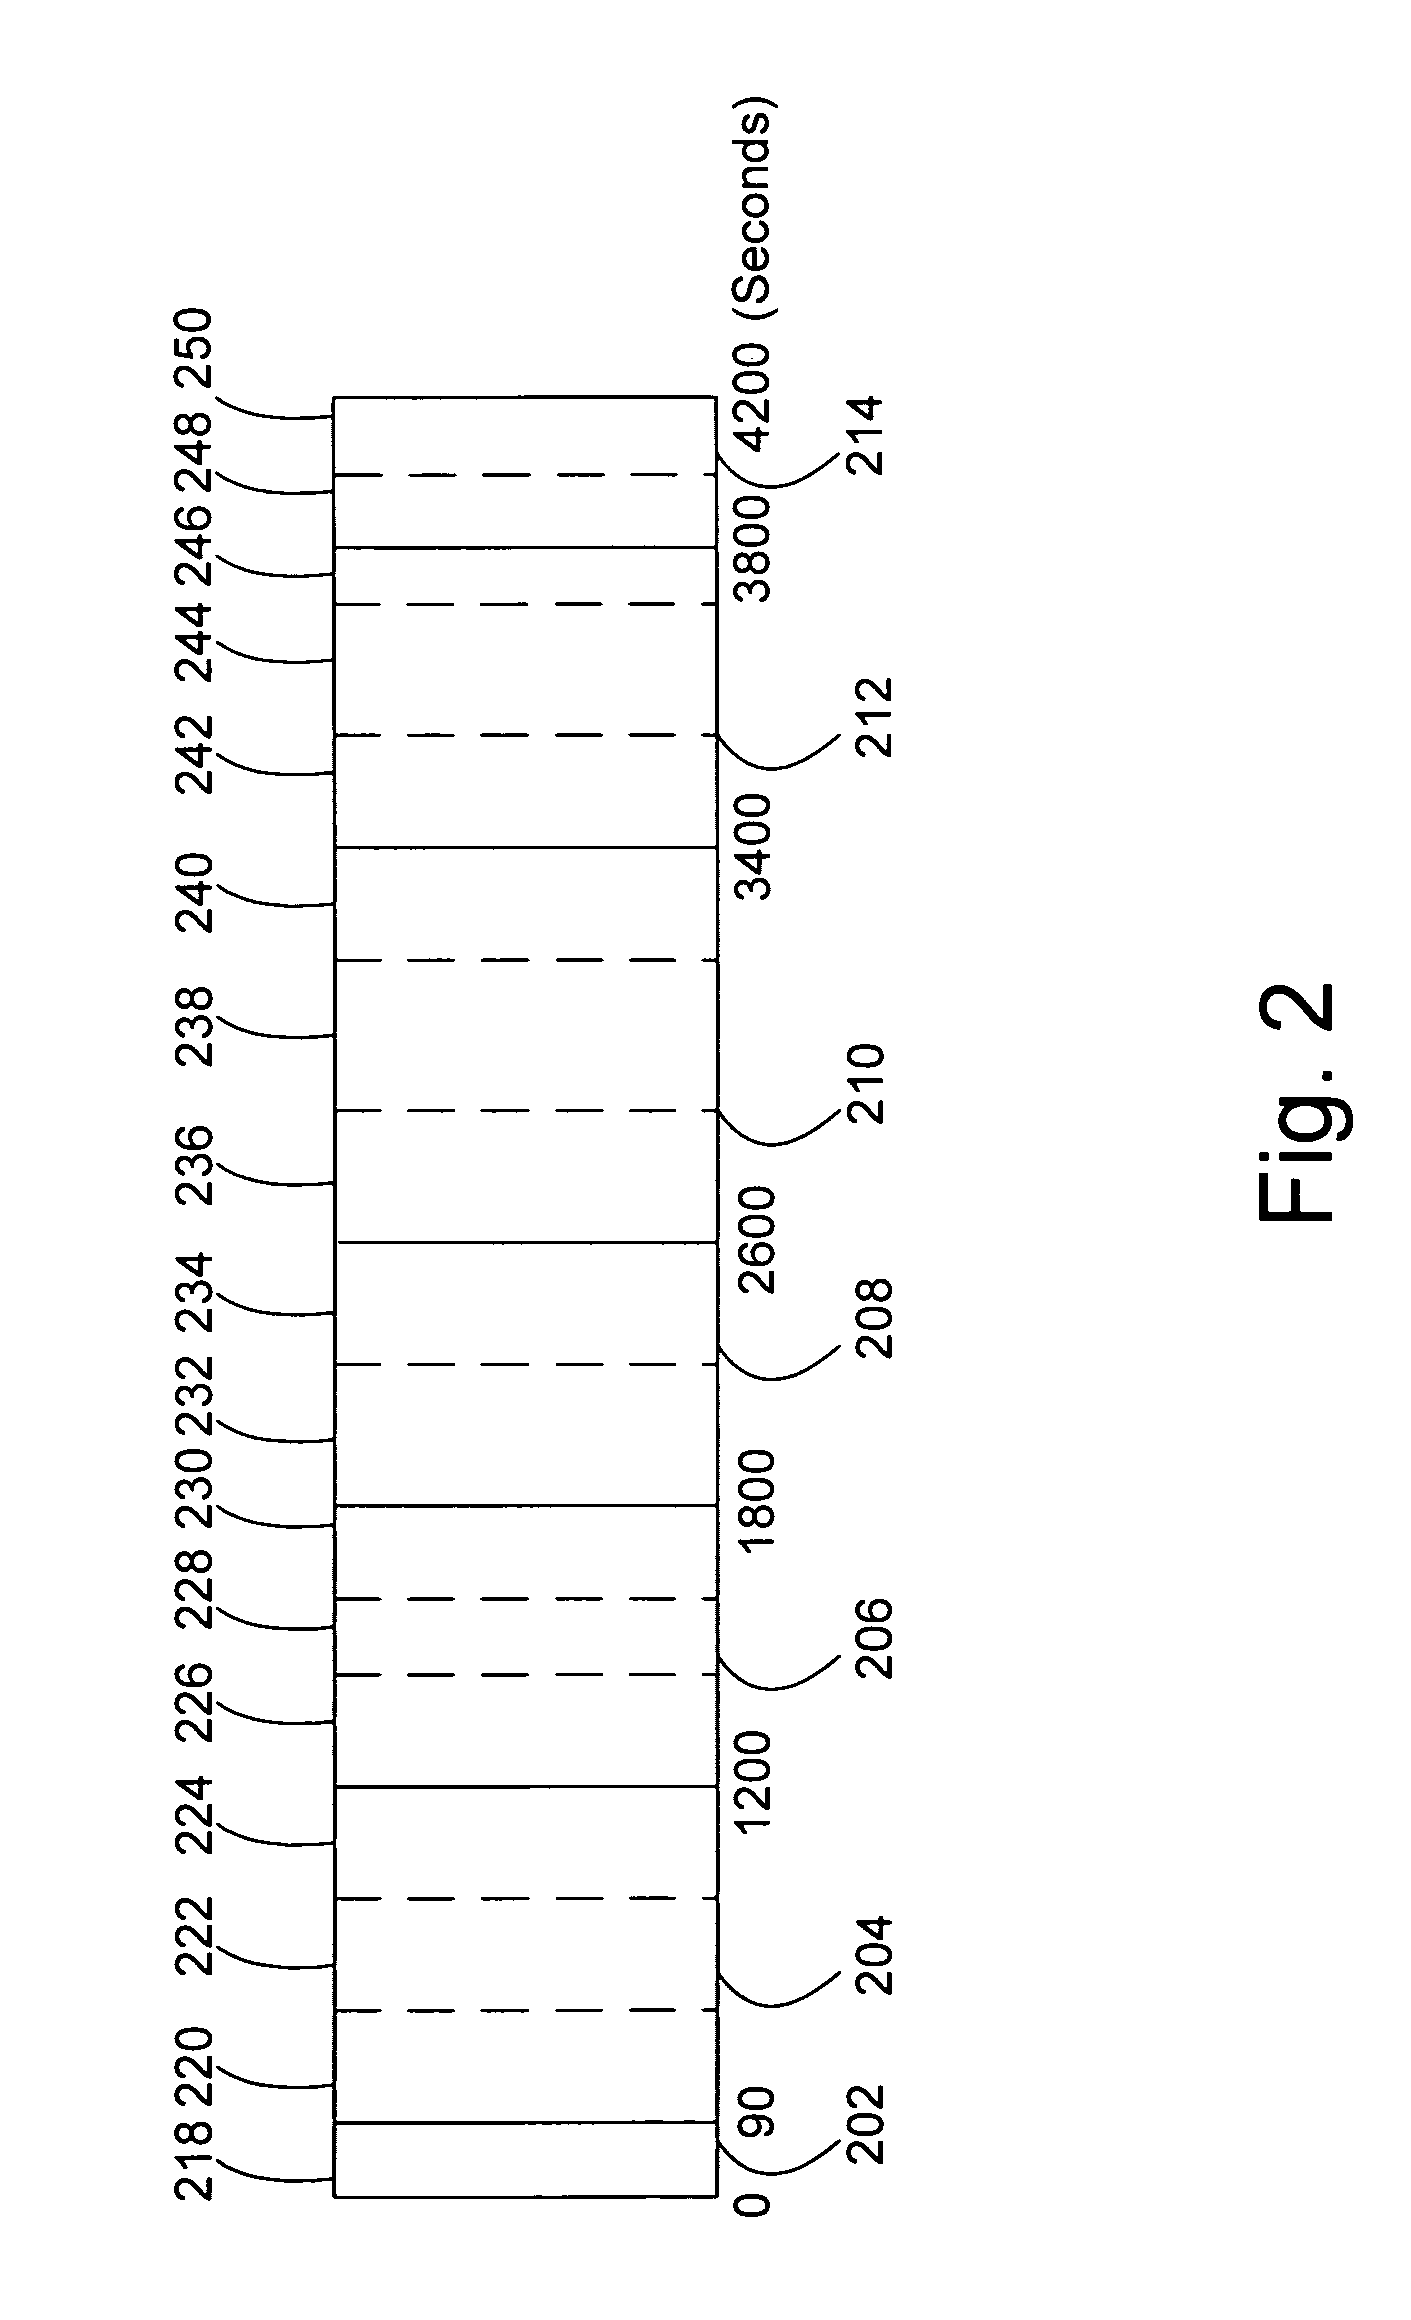 Systems and methods for indexing and searching digital video content